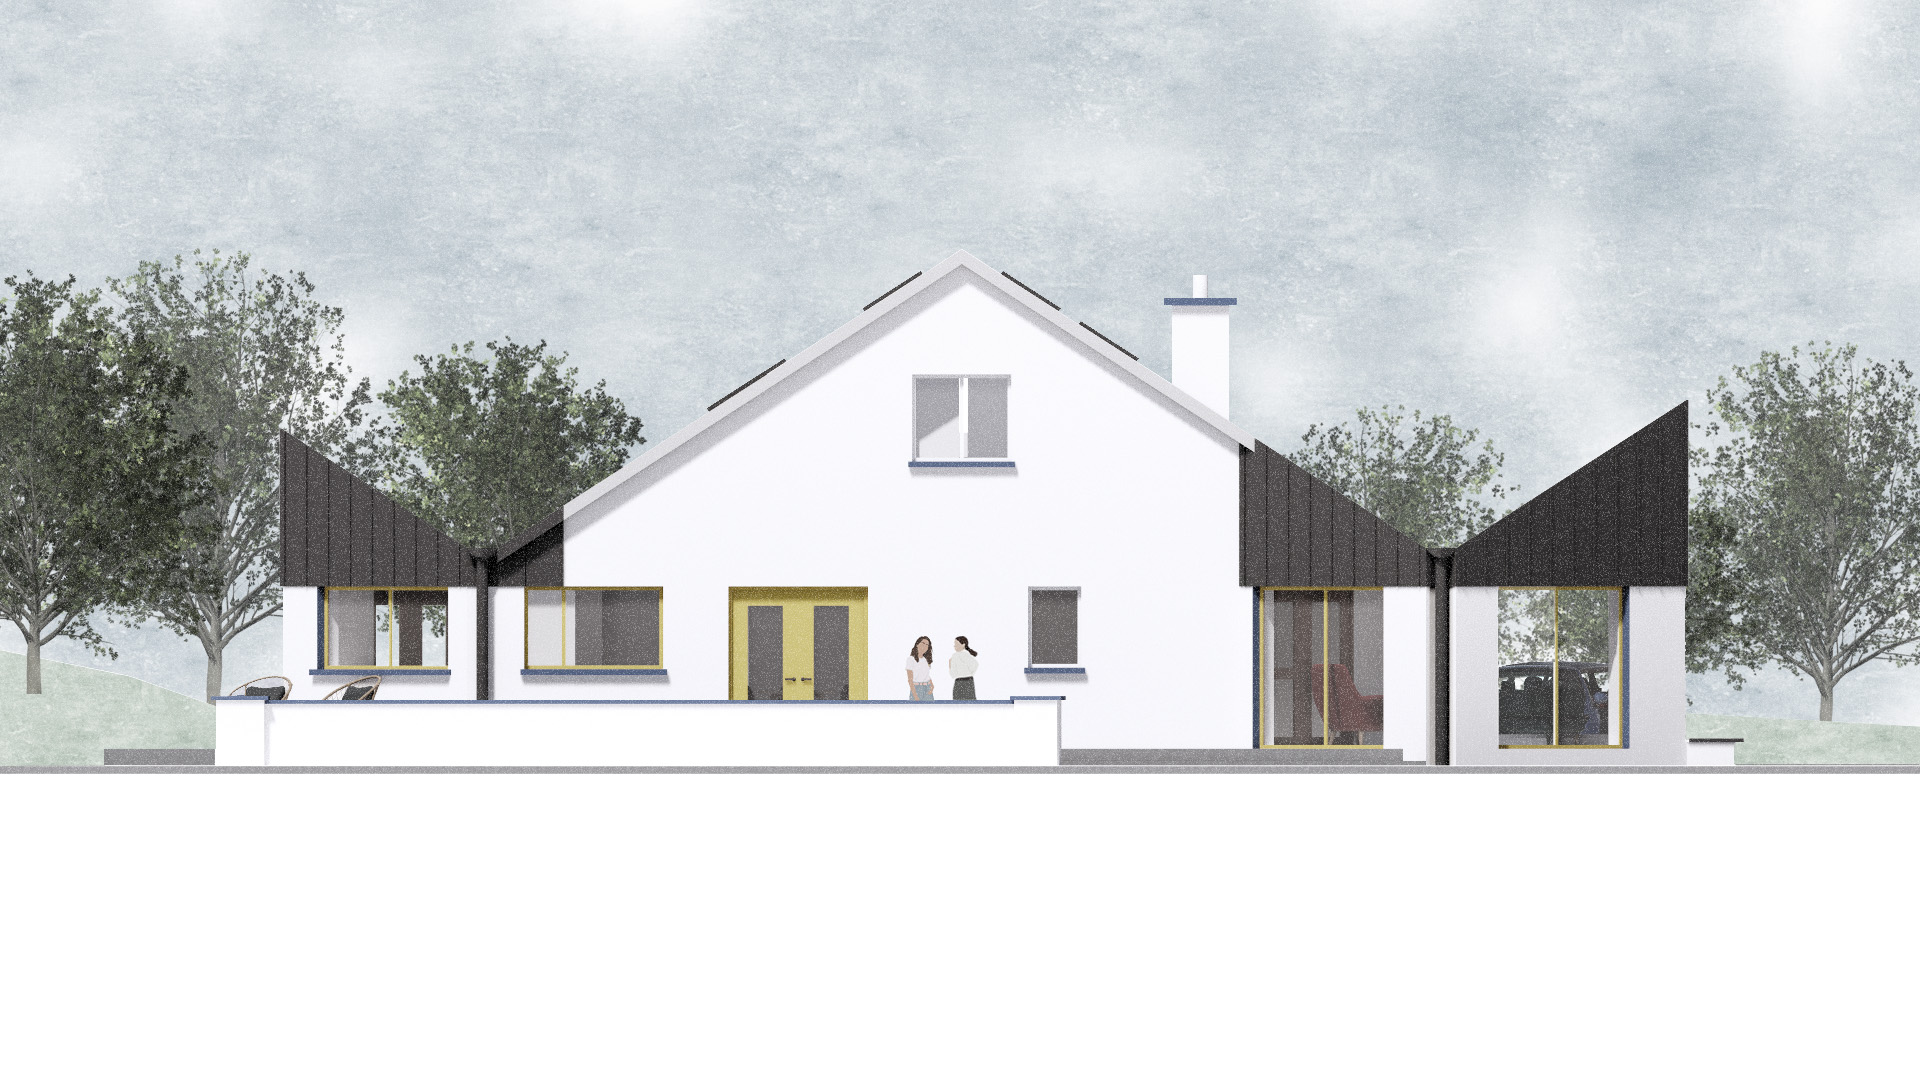 Renovation and extension near Ballyshannon, Co. Donegal